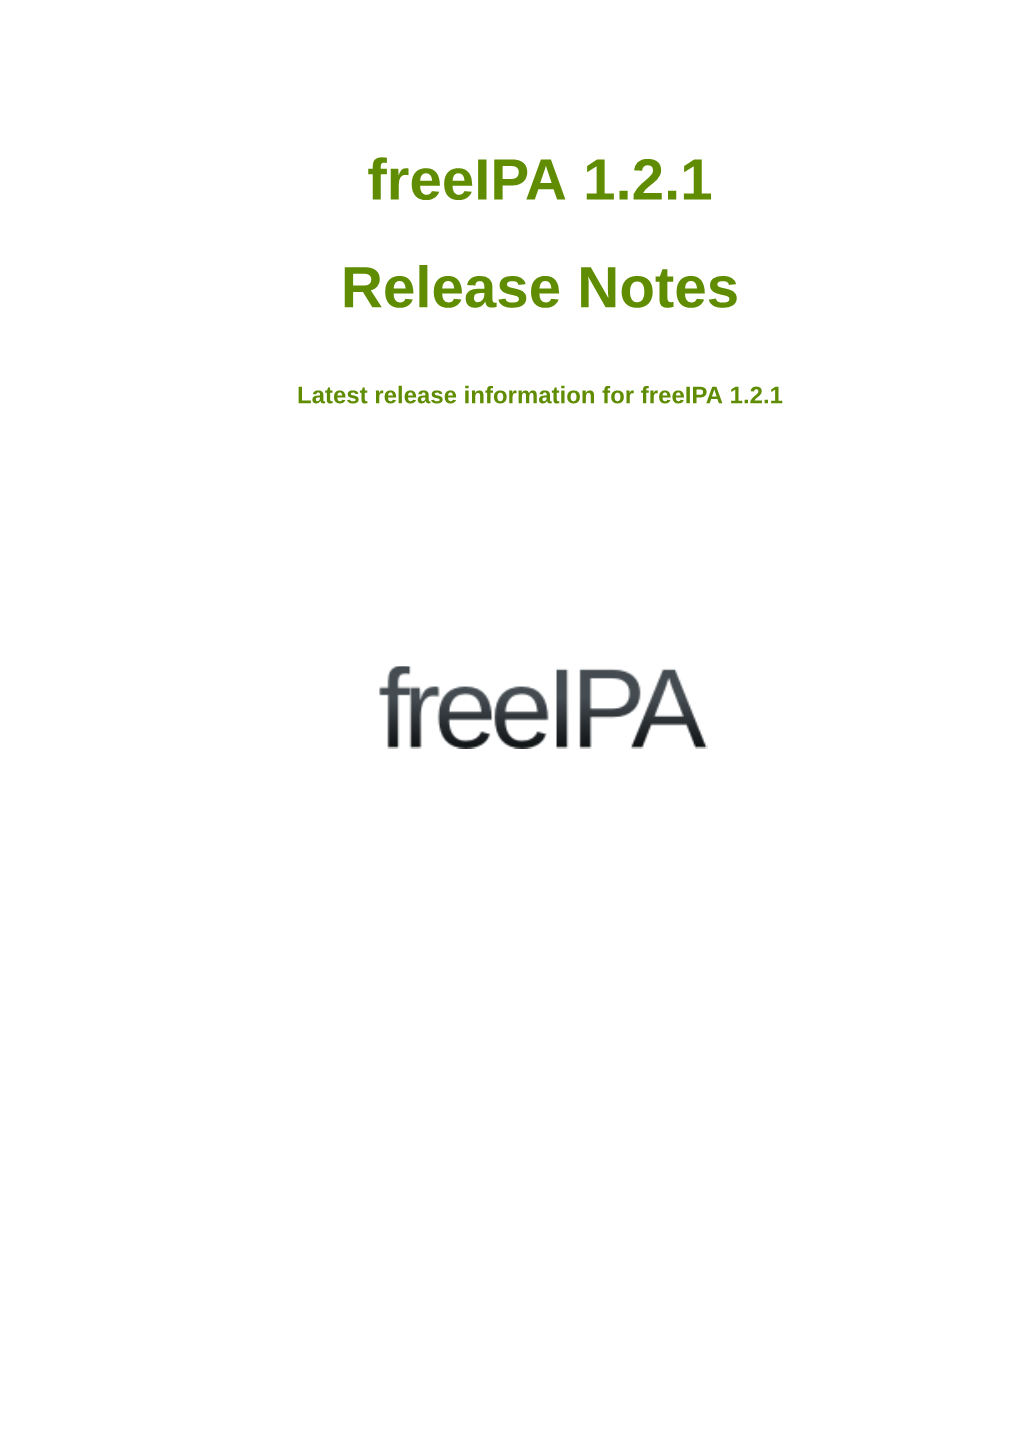 Freeipa 1.2.1 Release Notes